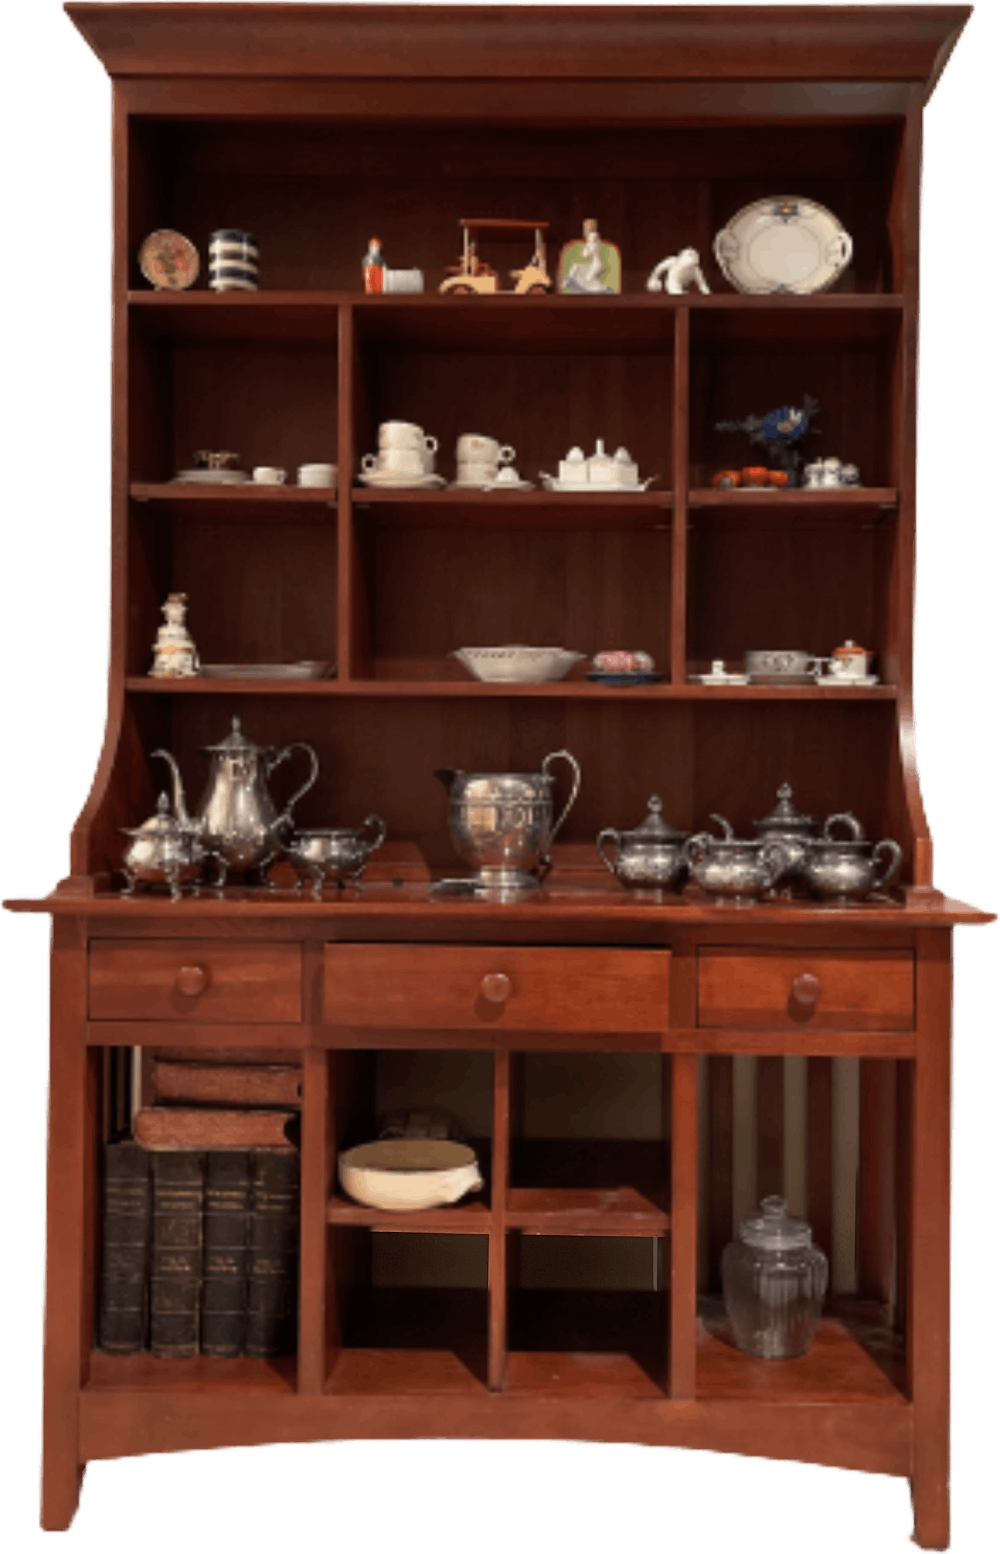 A wooden cabinet with many cups and saucers on it.